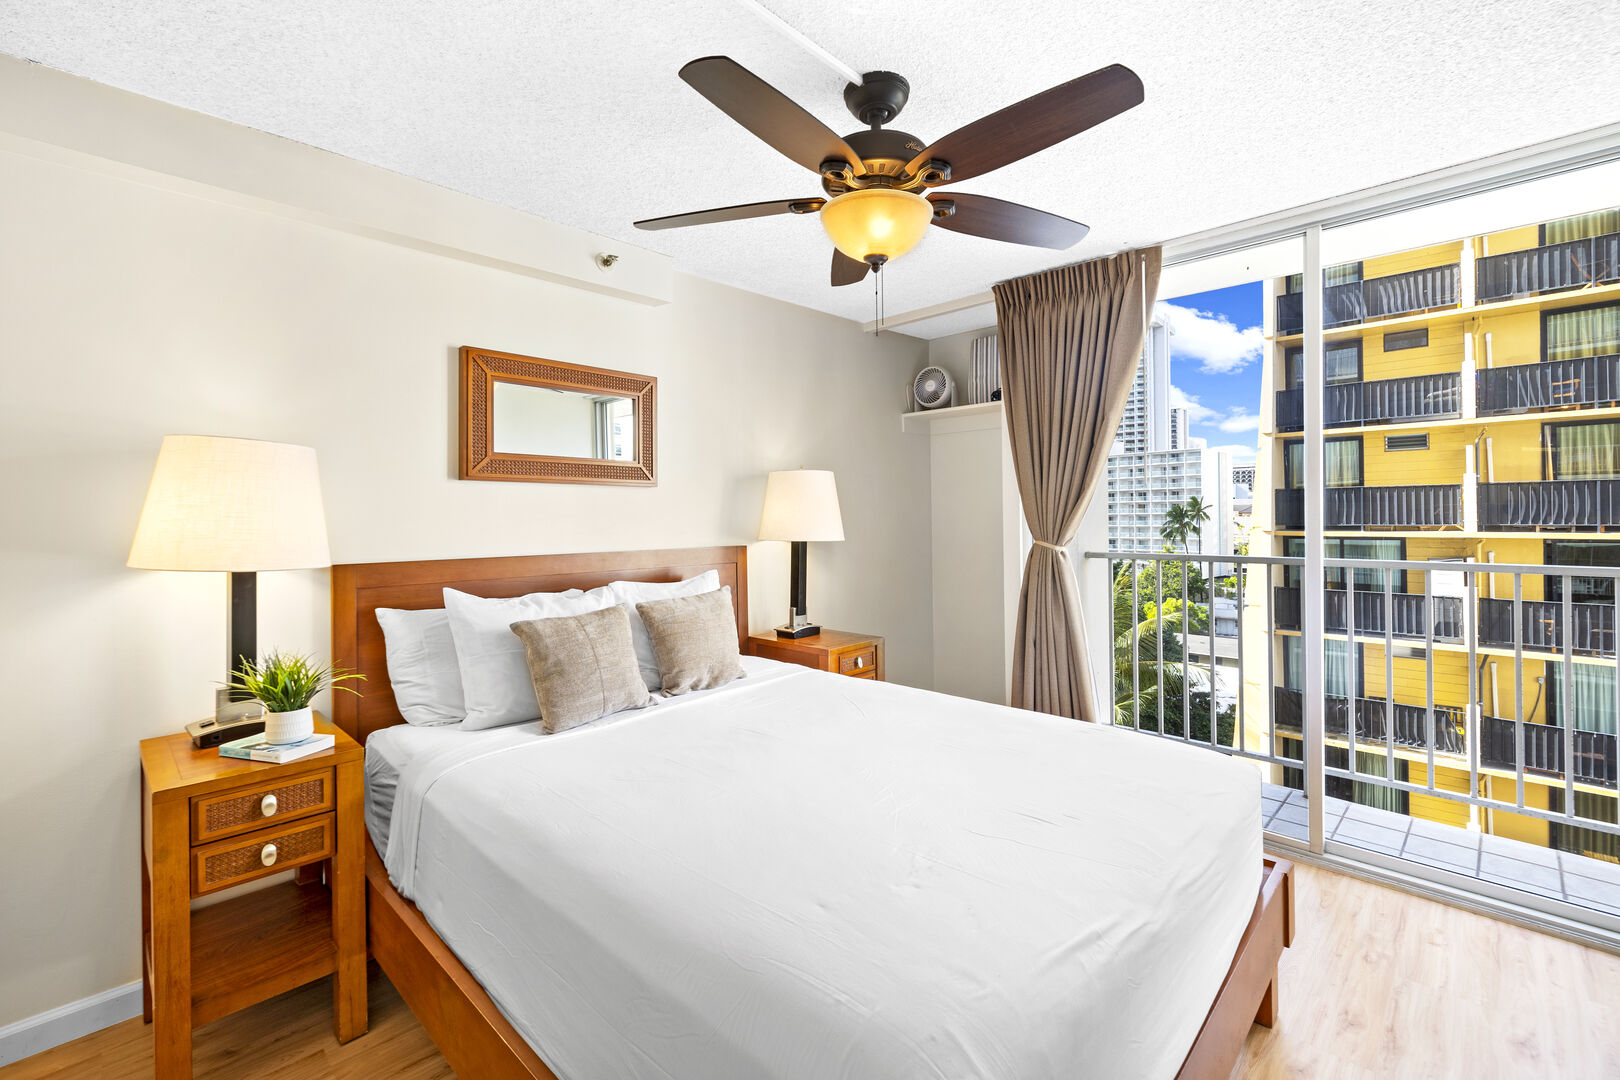 Relax in your bedroom with a queen-size bed, ceiling fan, nightstands, and blackout curtains.